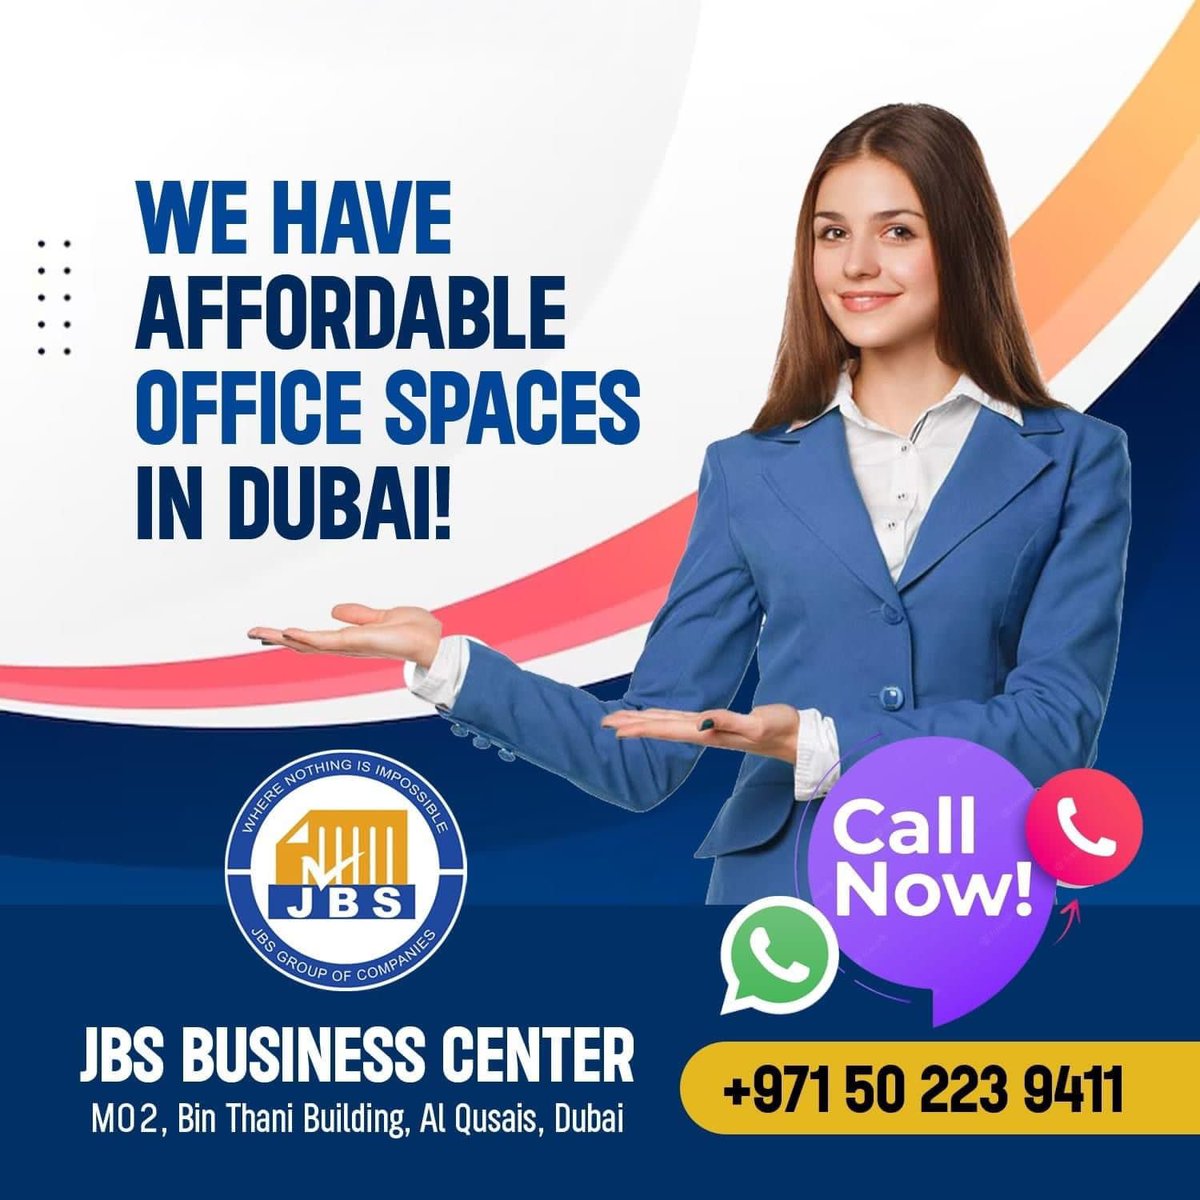 Call now to view offices #yearly Contracts ₹flexible Payments Terms
#jbsgroupofcompanies#jbsgovernmenttransactions